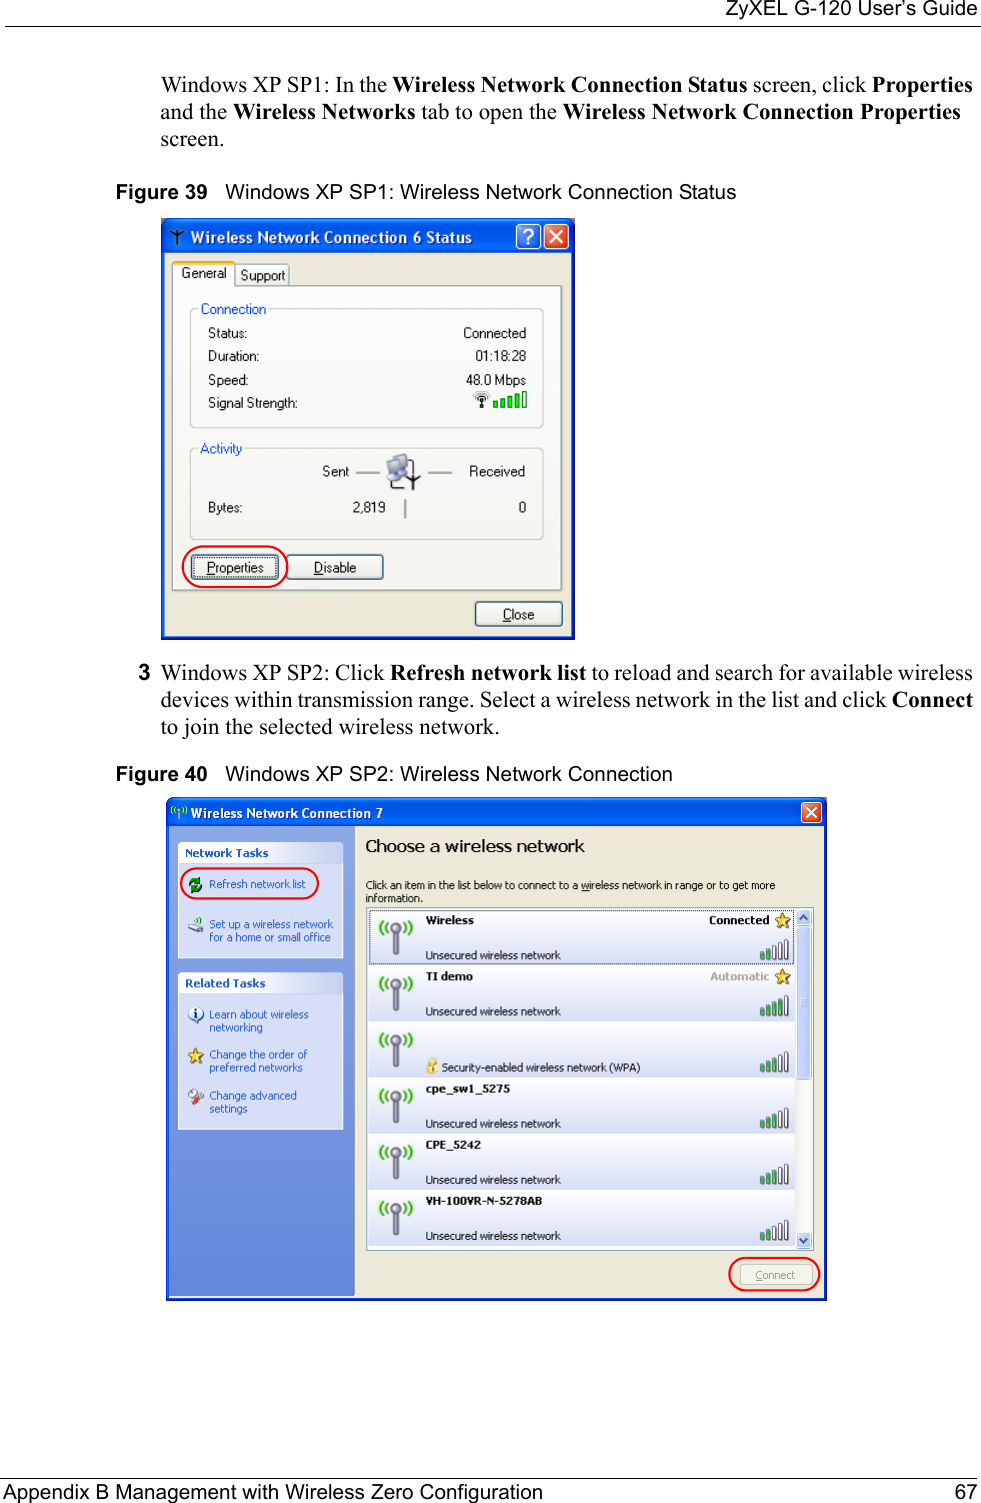 ZyXEL G-120 User’s GuideAppendix B Management with Wireless Zero Configuration 67Windows XP SP1: In the Wireless Network Connection Status screen, click Properties and the Wireless Networks tab to open the Wireless Network Connection Properties screen.Figure 39   Windows XP SP1: Wireless Network Connection Status3Windows XP SP2: Click Refresh network list to reload and search for available wireless devices within transmission range. Select a wireless network in the list and click Connect to join the selected wireless network.Figure 40   Windows XP SP2: Wireless Network Connection